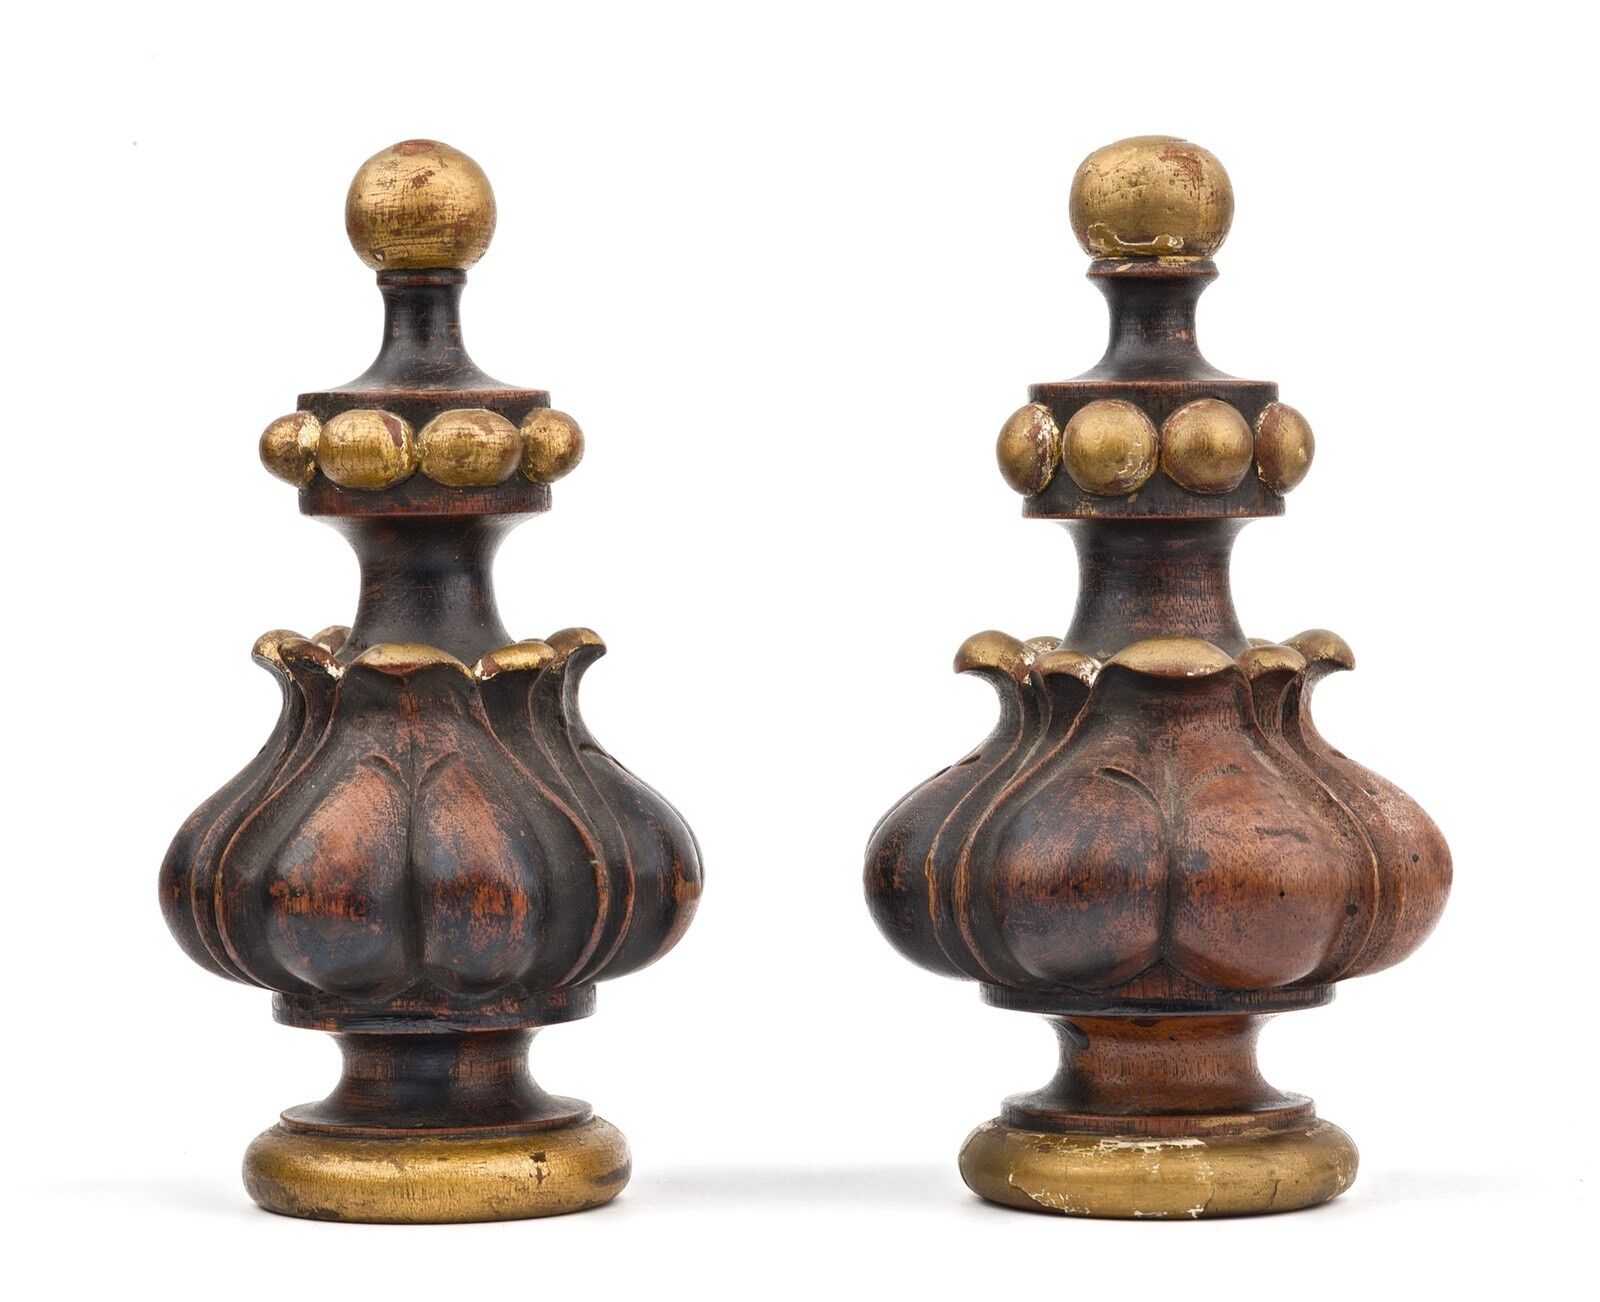 A Pair Of Antique Carved Wooden Gilt Decorated Finials